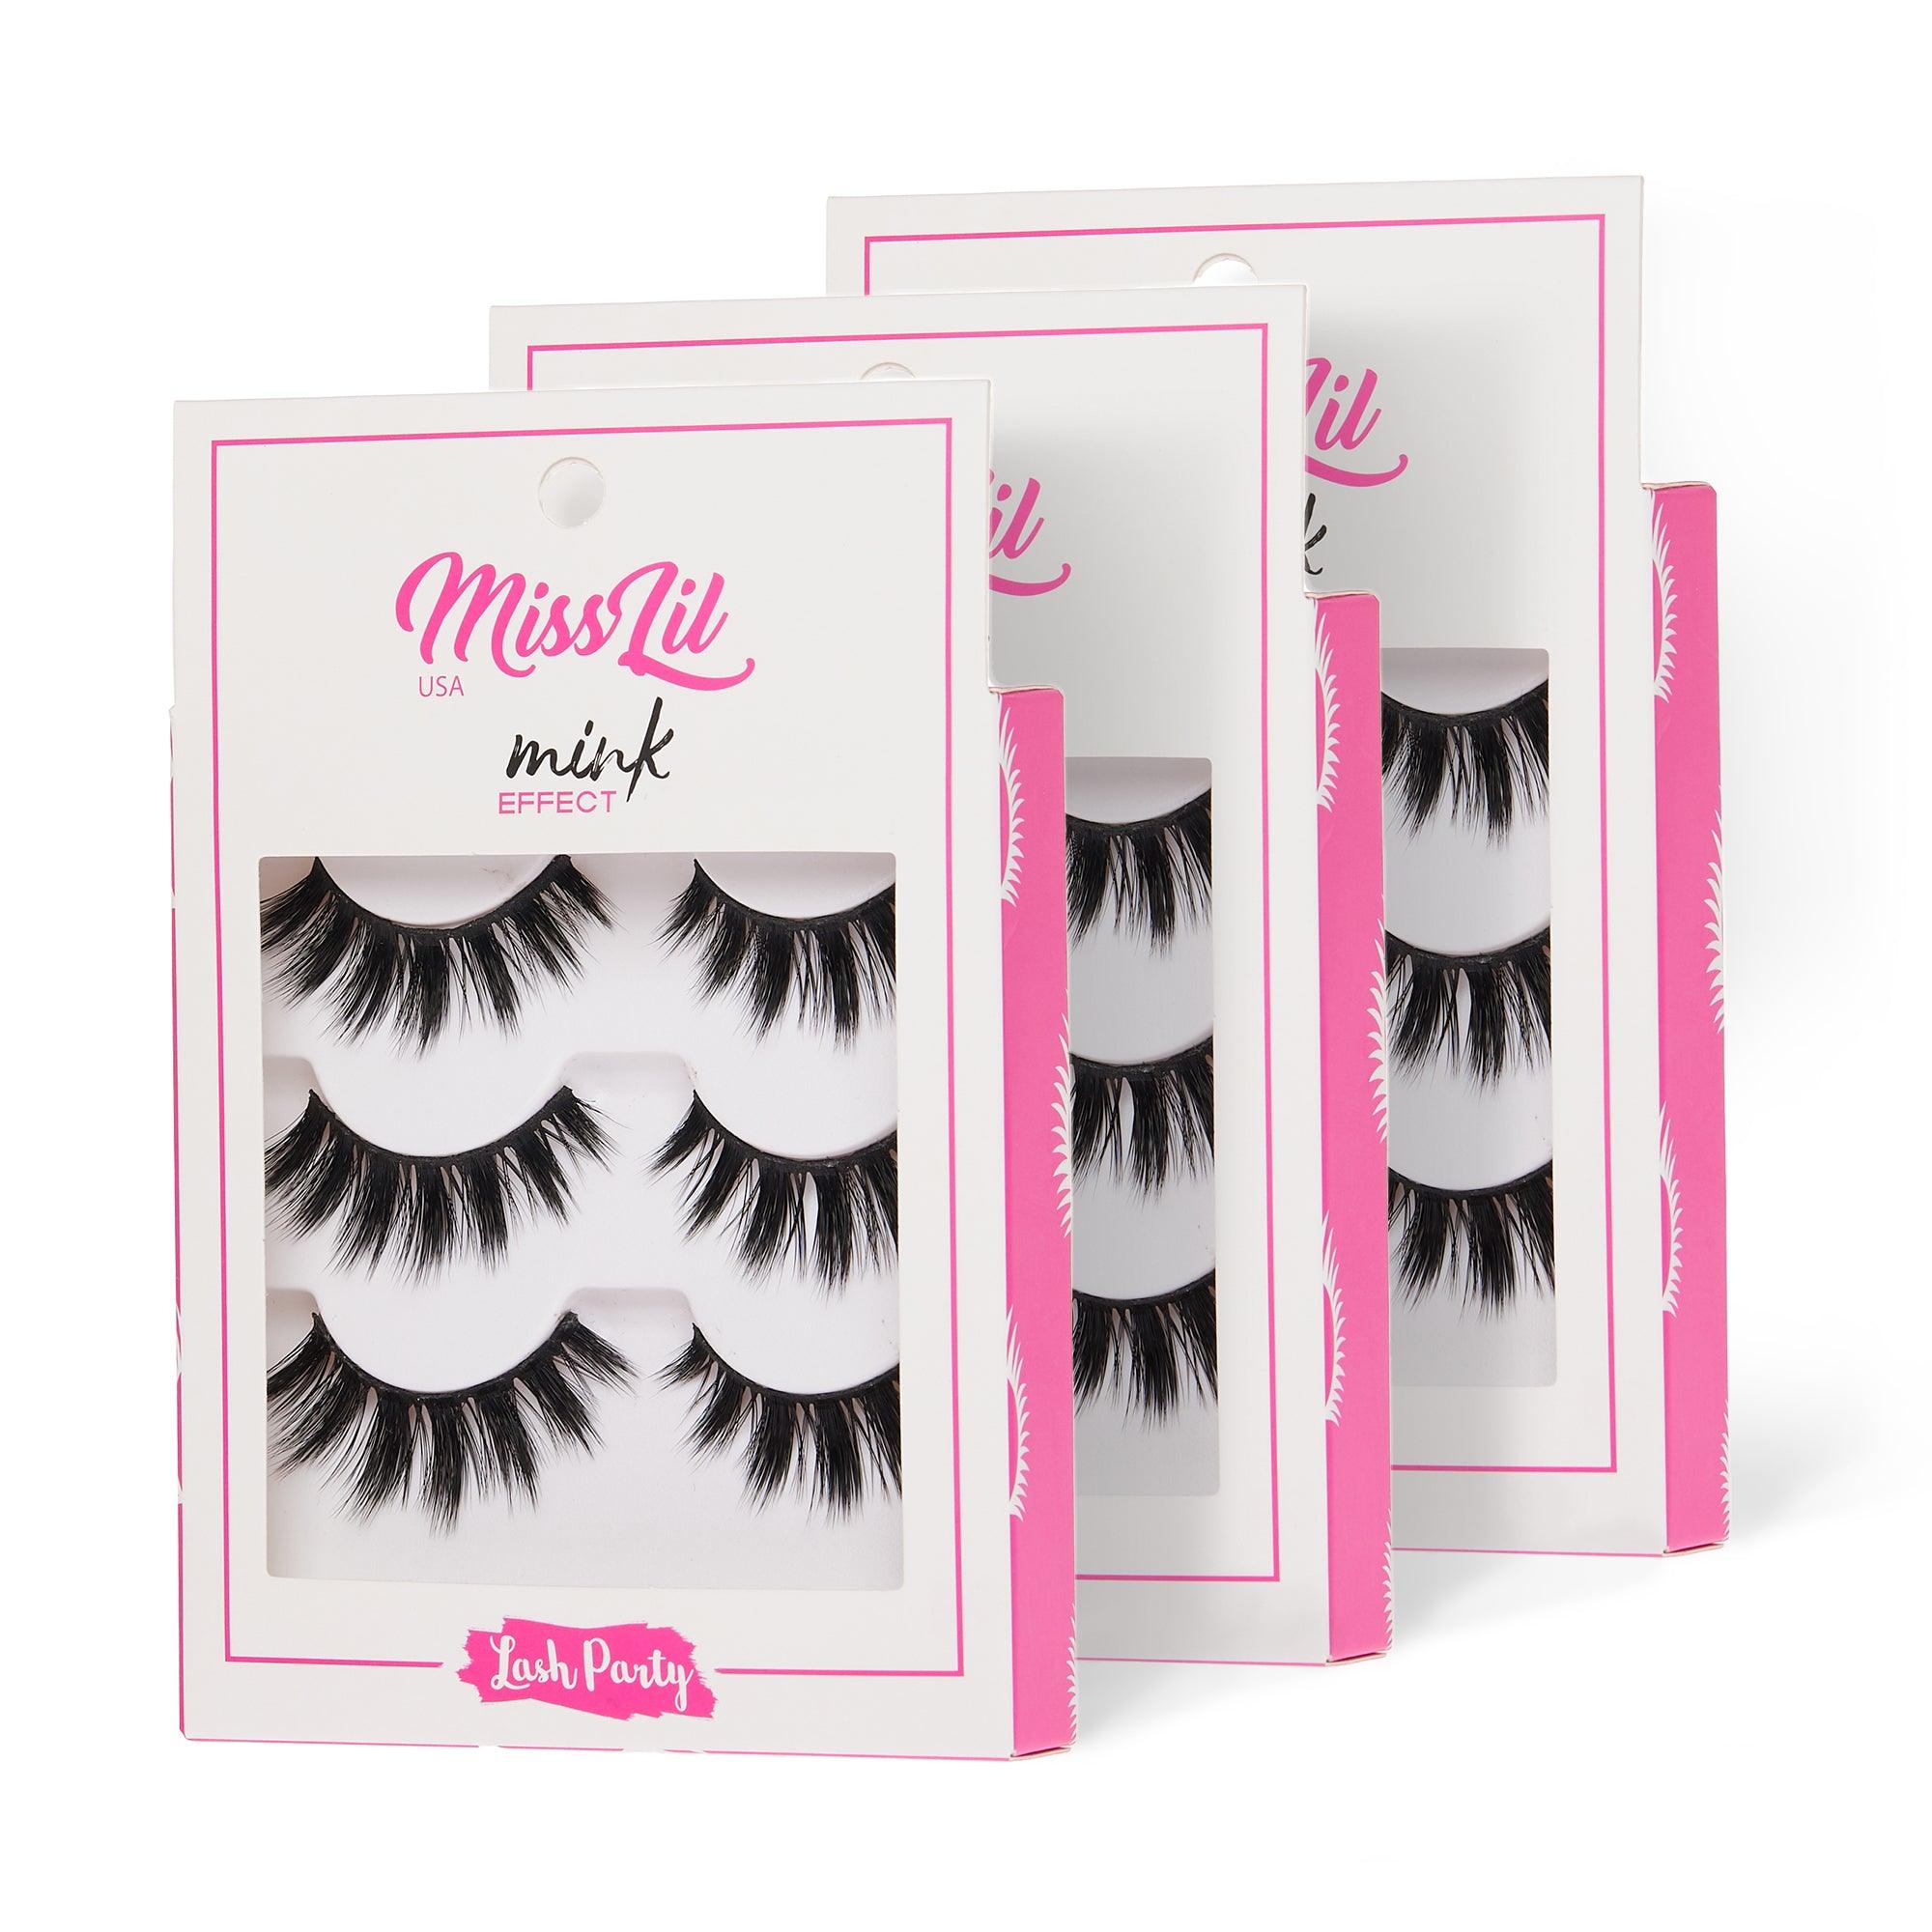 3-Pair Faux Mink Effect Eyelashes - Lash Party Collection #19 - Pack of 3 - Miss Lil USA